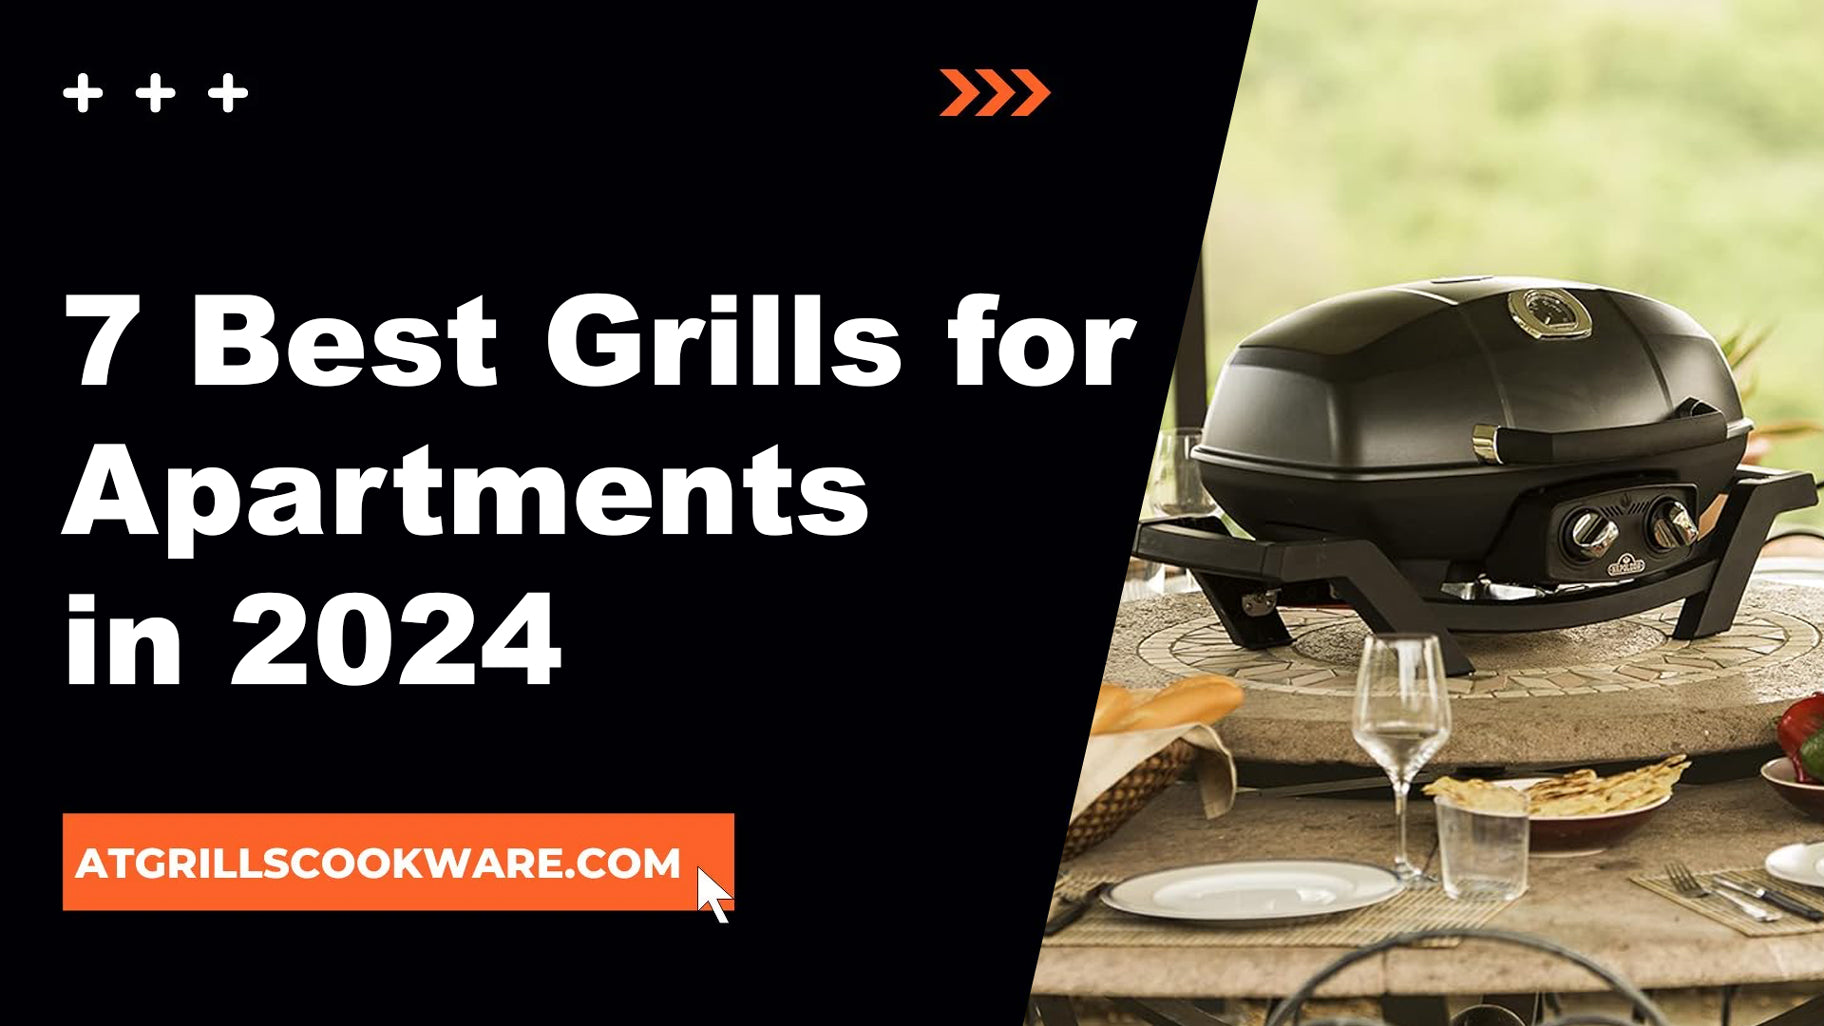 7 Best Grills for Apartments in 2024